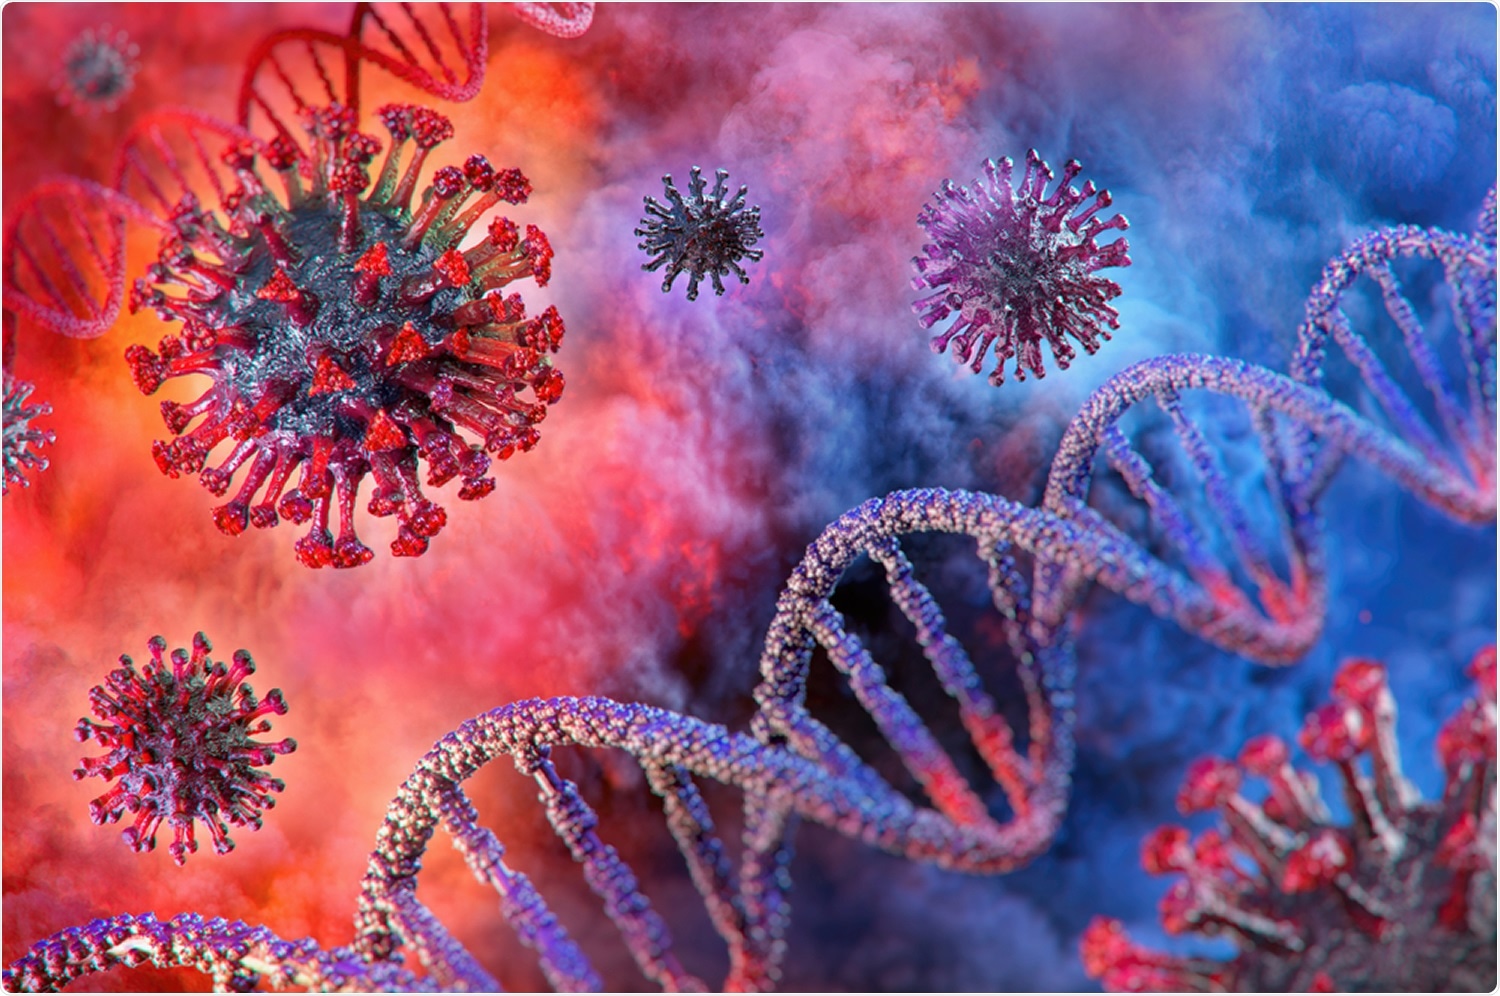 Study: Within-host evolution of SARS-CoV-2 in an immunosuppressed COVID-19 patient as a source of immune escape variants. Image Credit: Corona Borealis Studio / Shutterstock